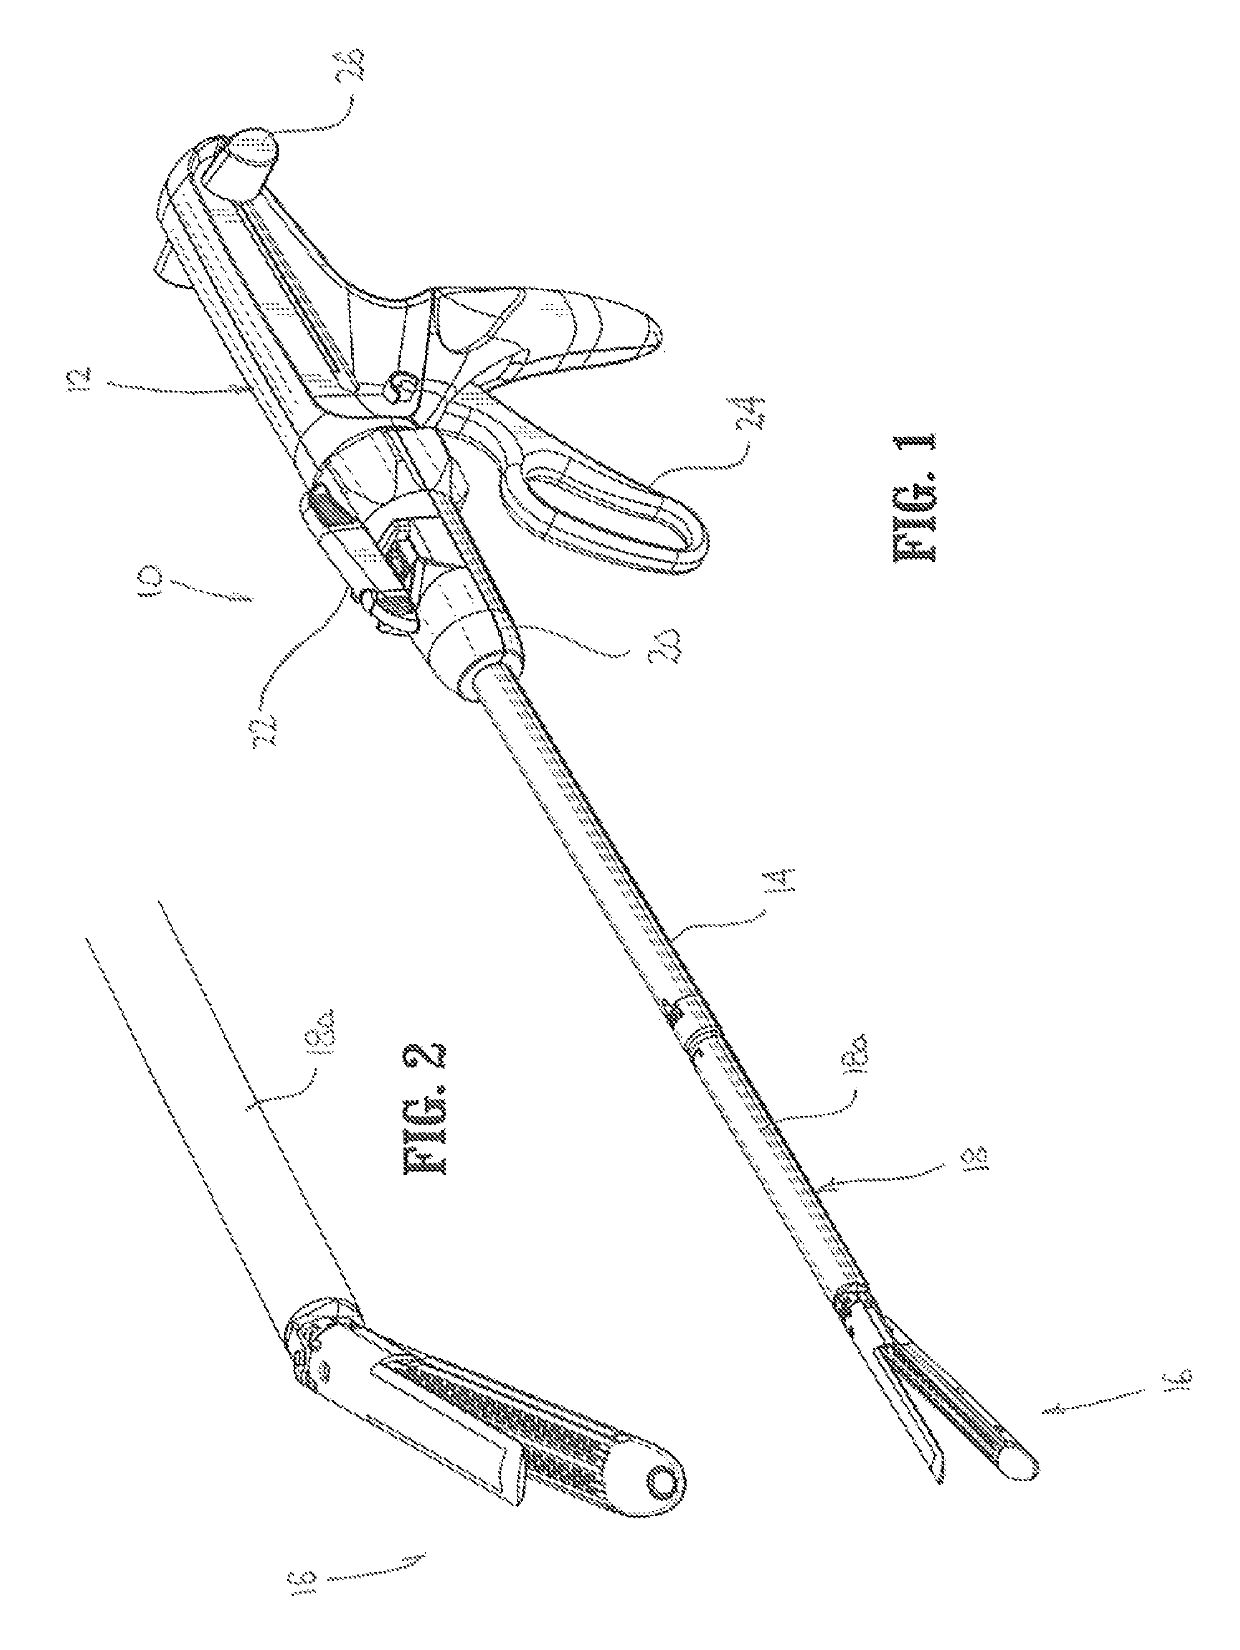 Surgical stapler with articulation locking mechanism